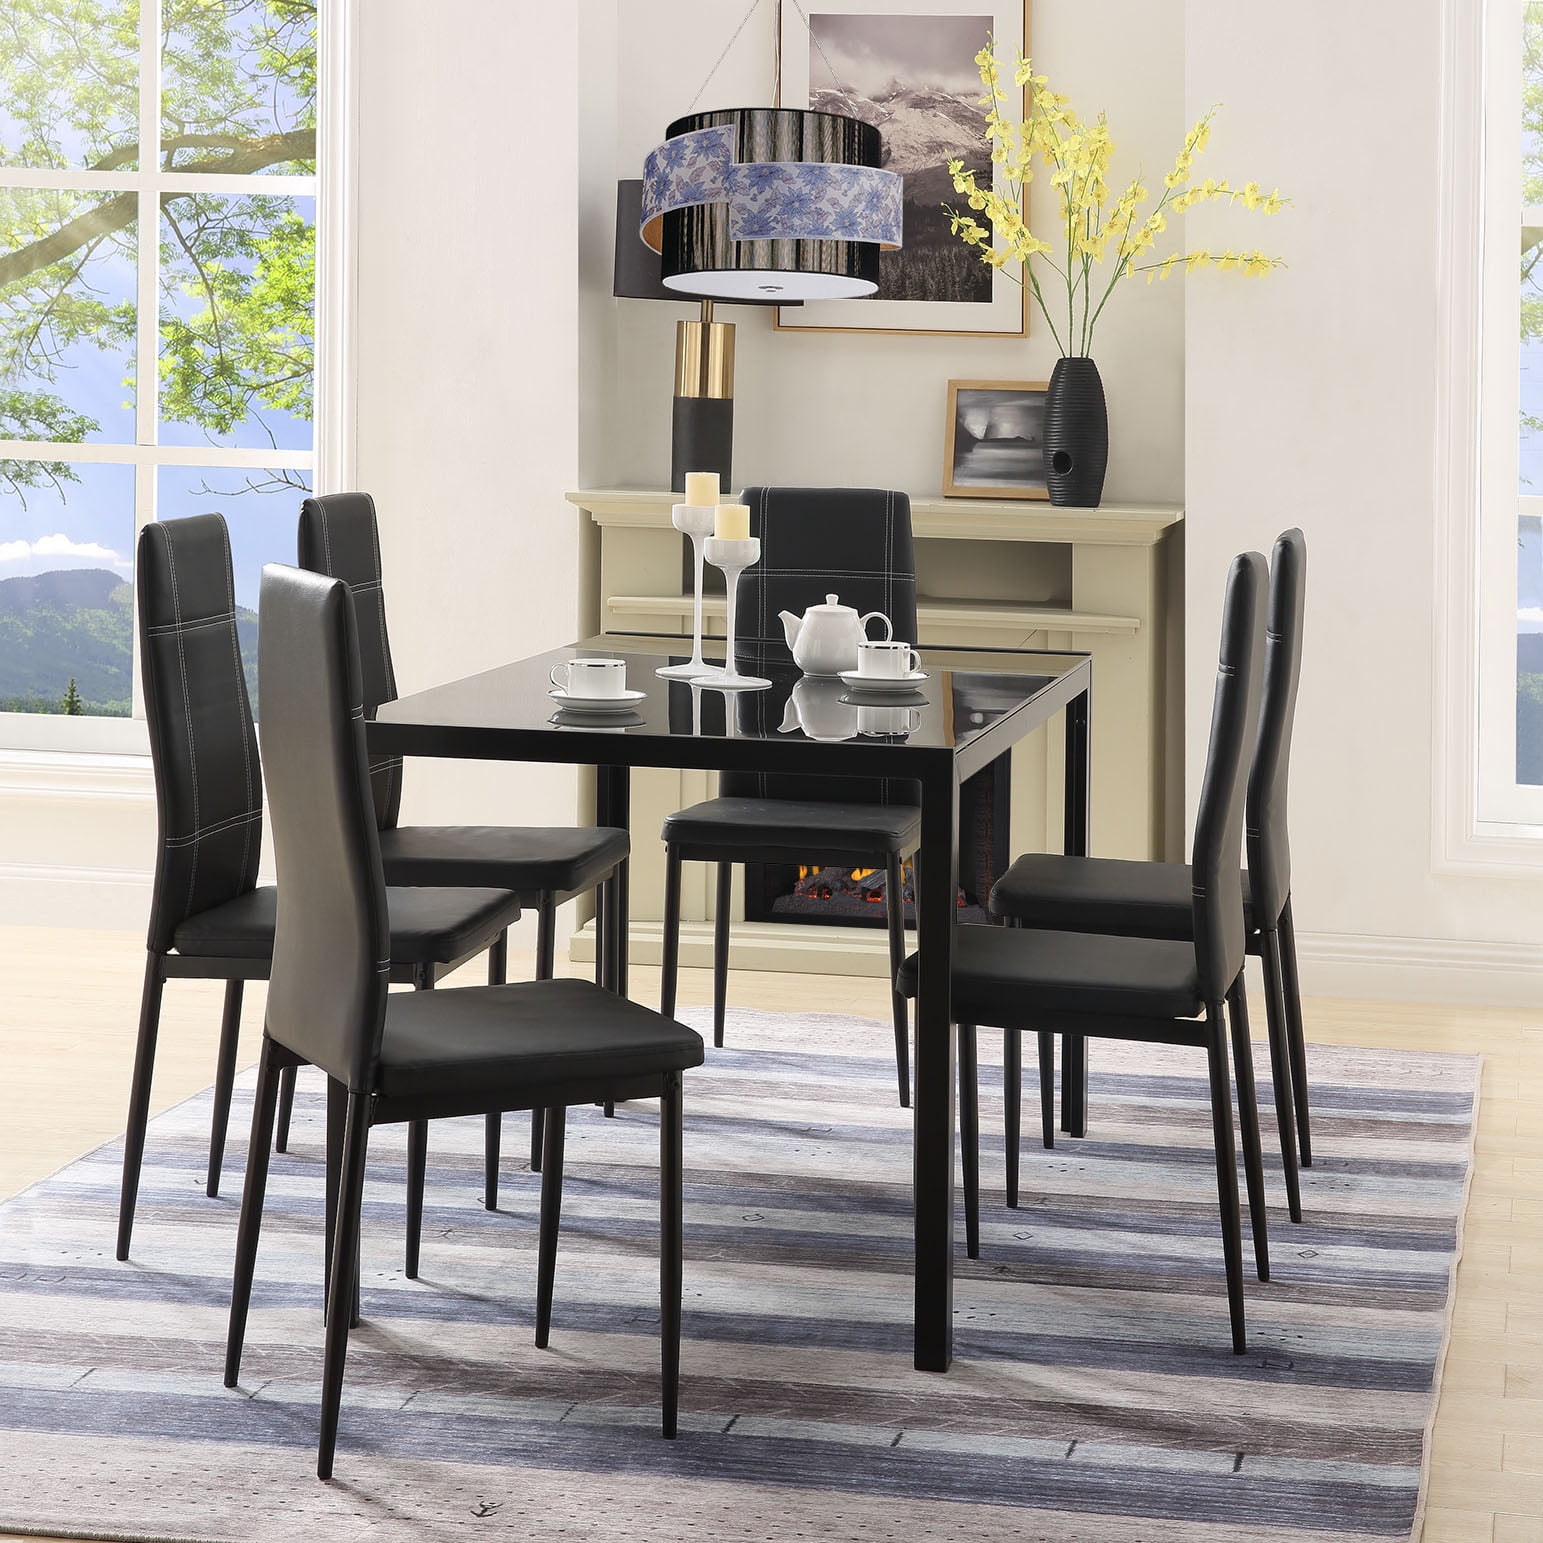 Metal Dining Table Set With 6 Chairs, Small Black Dining Room Table And Chairs